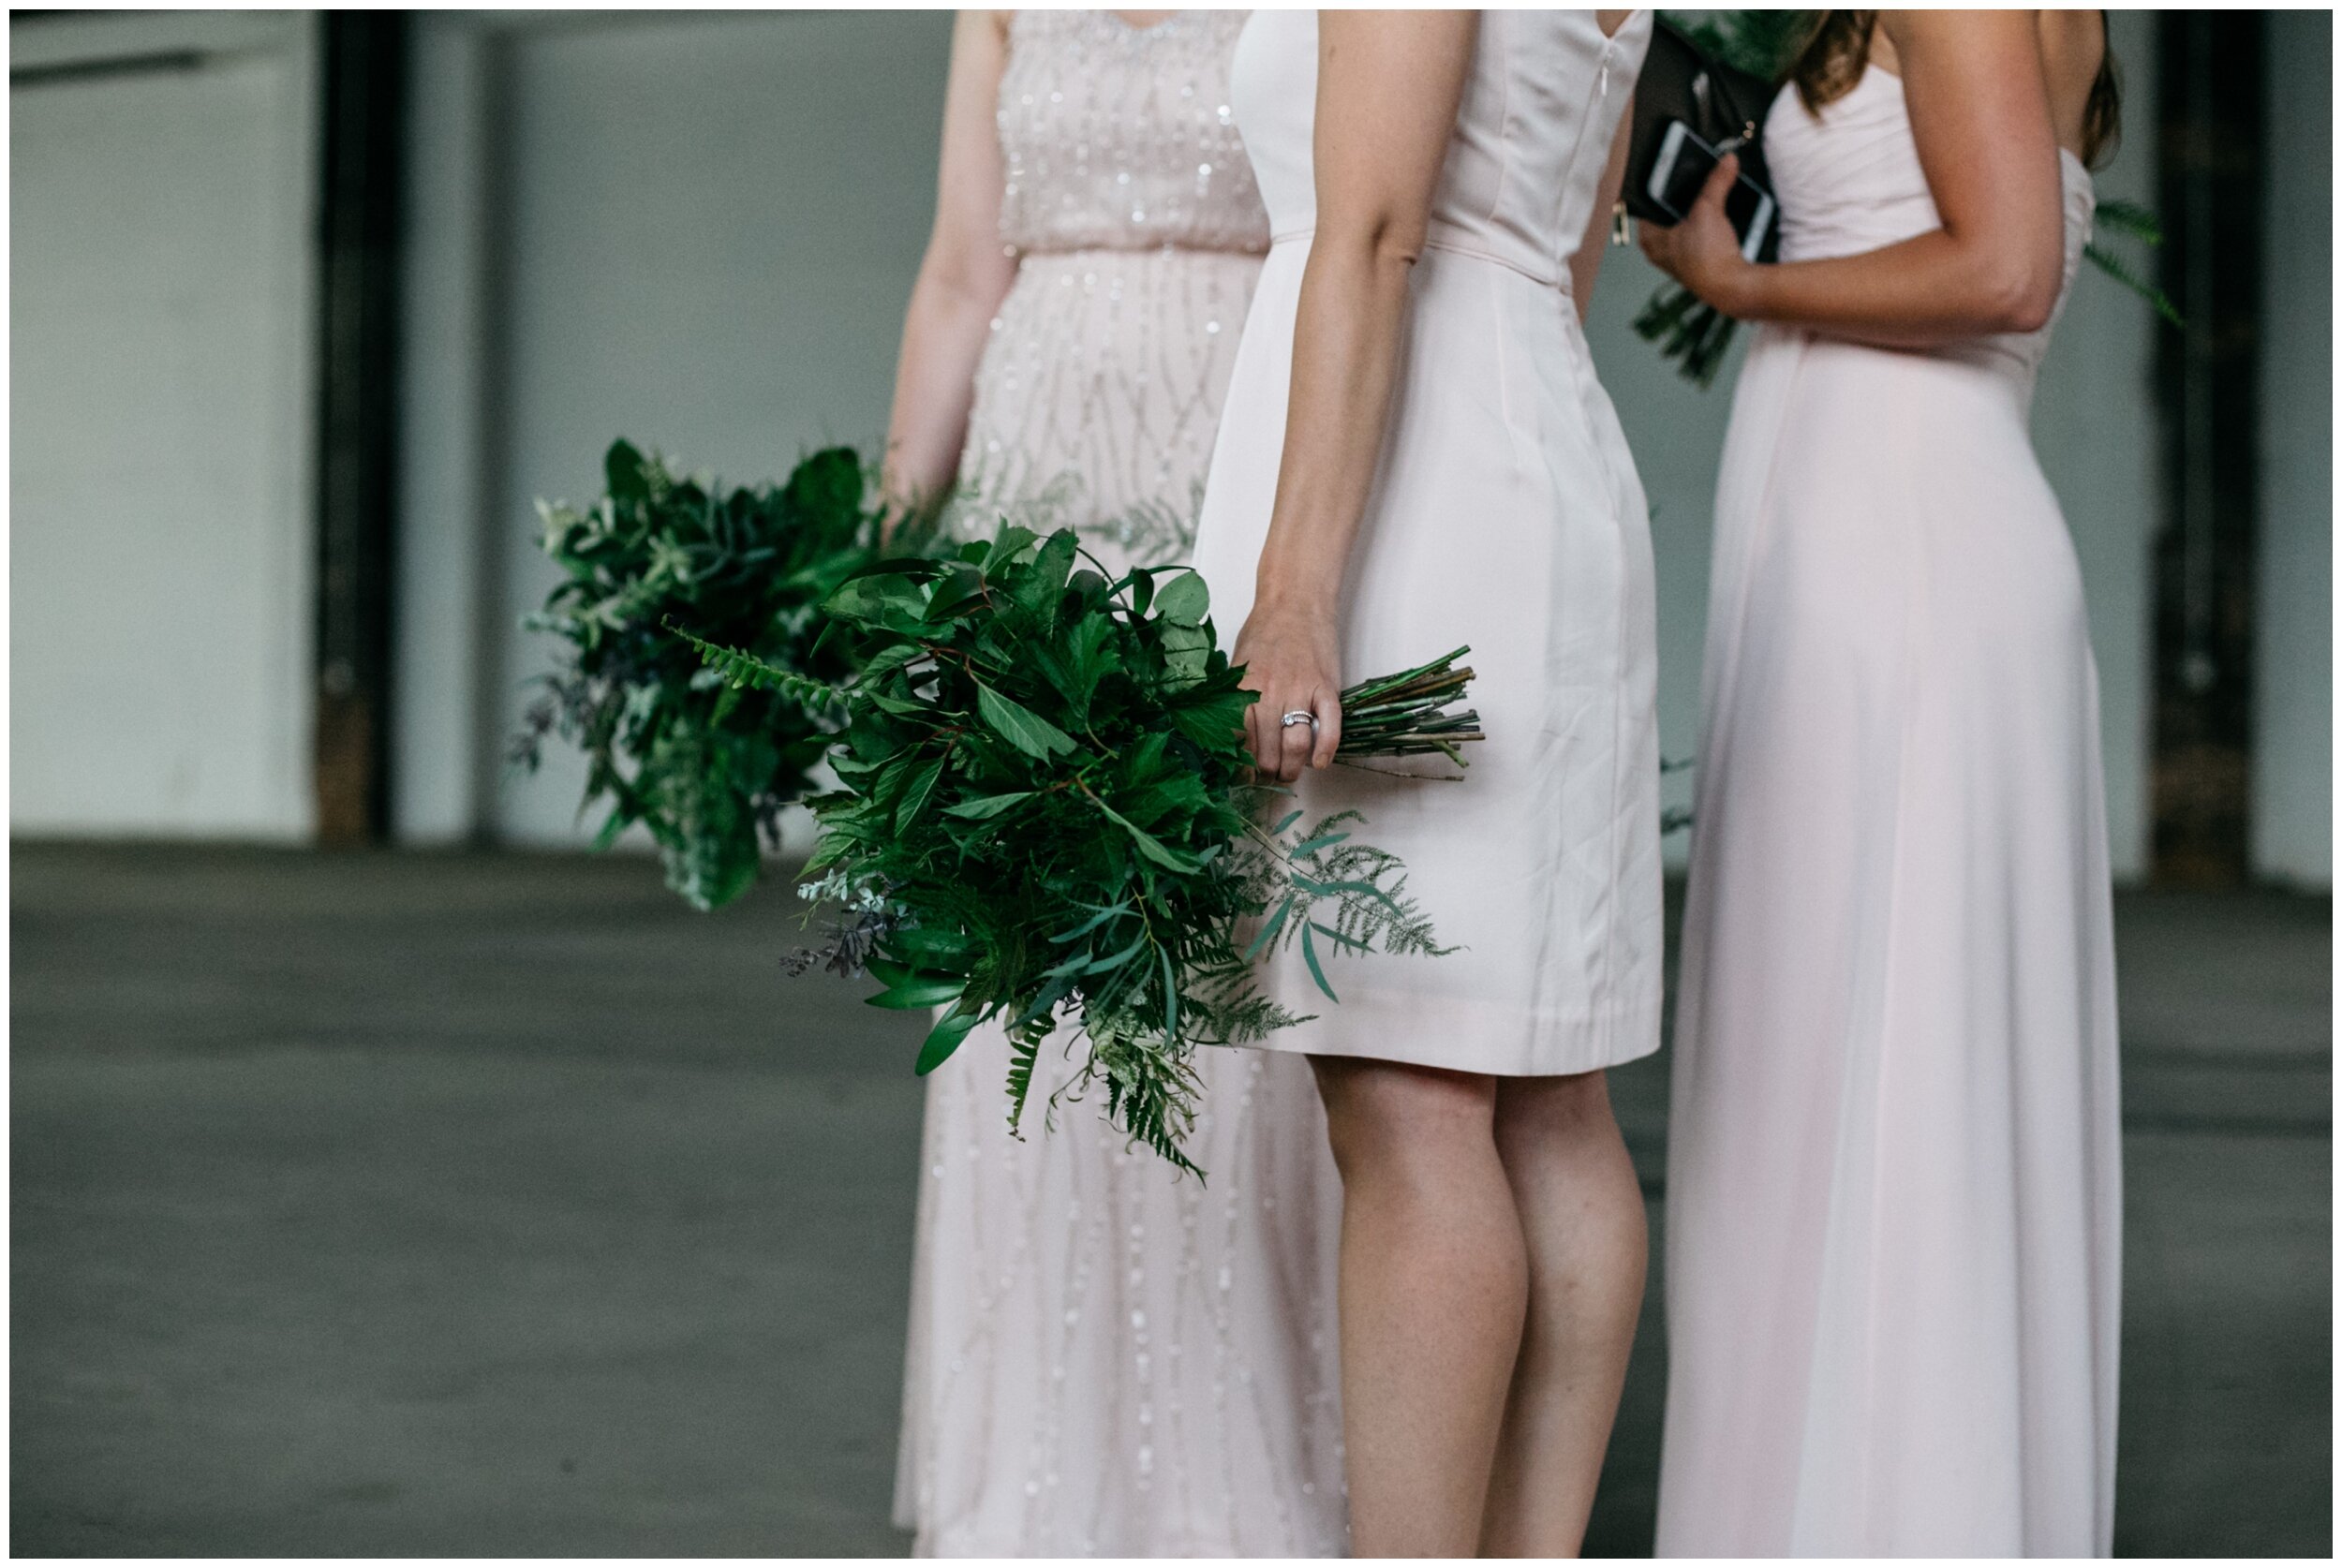 Bridesmaids wearing blush colored dresses holding fern bouquets 